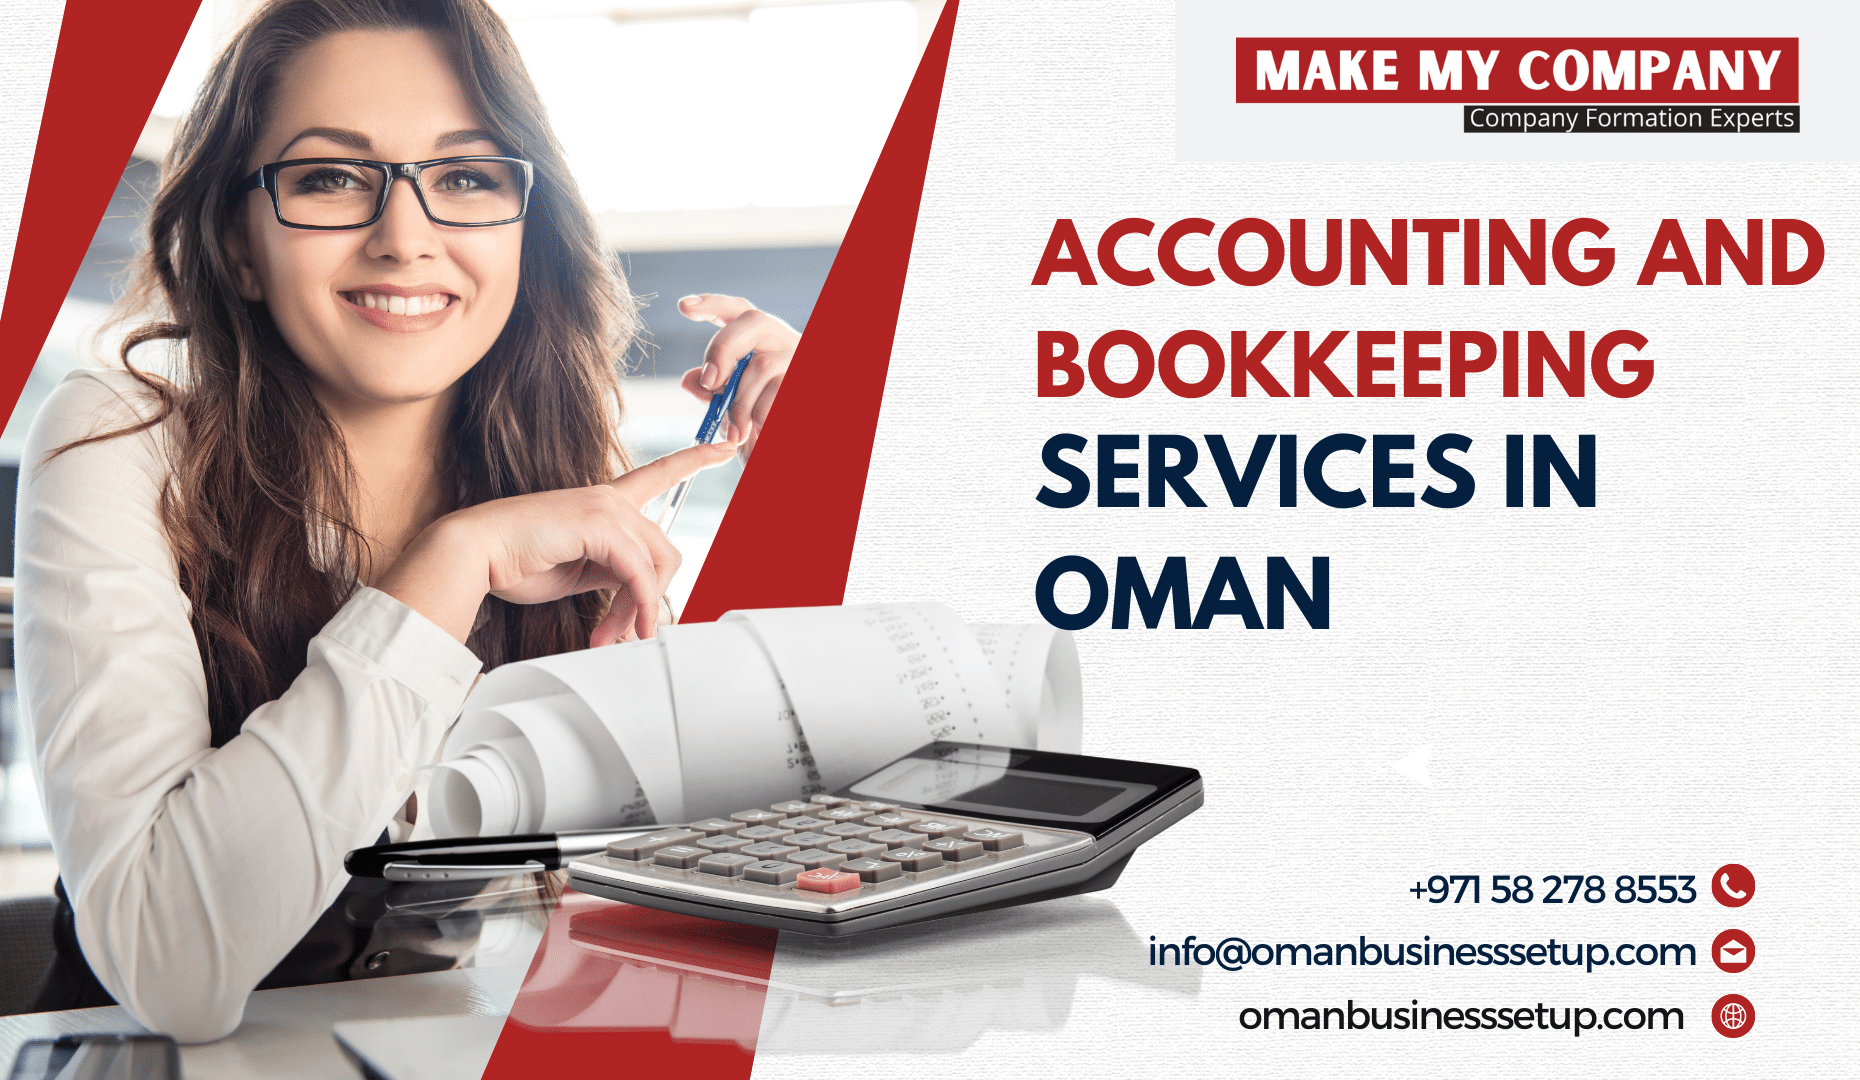 Accounting and bookkeeping services in Oman